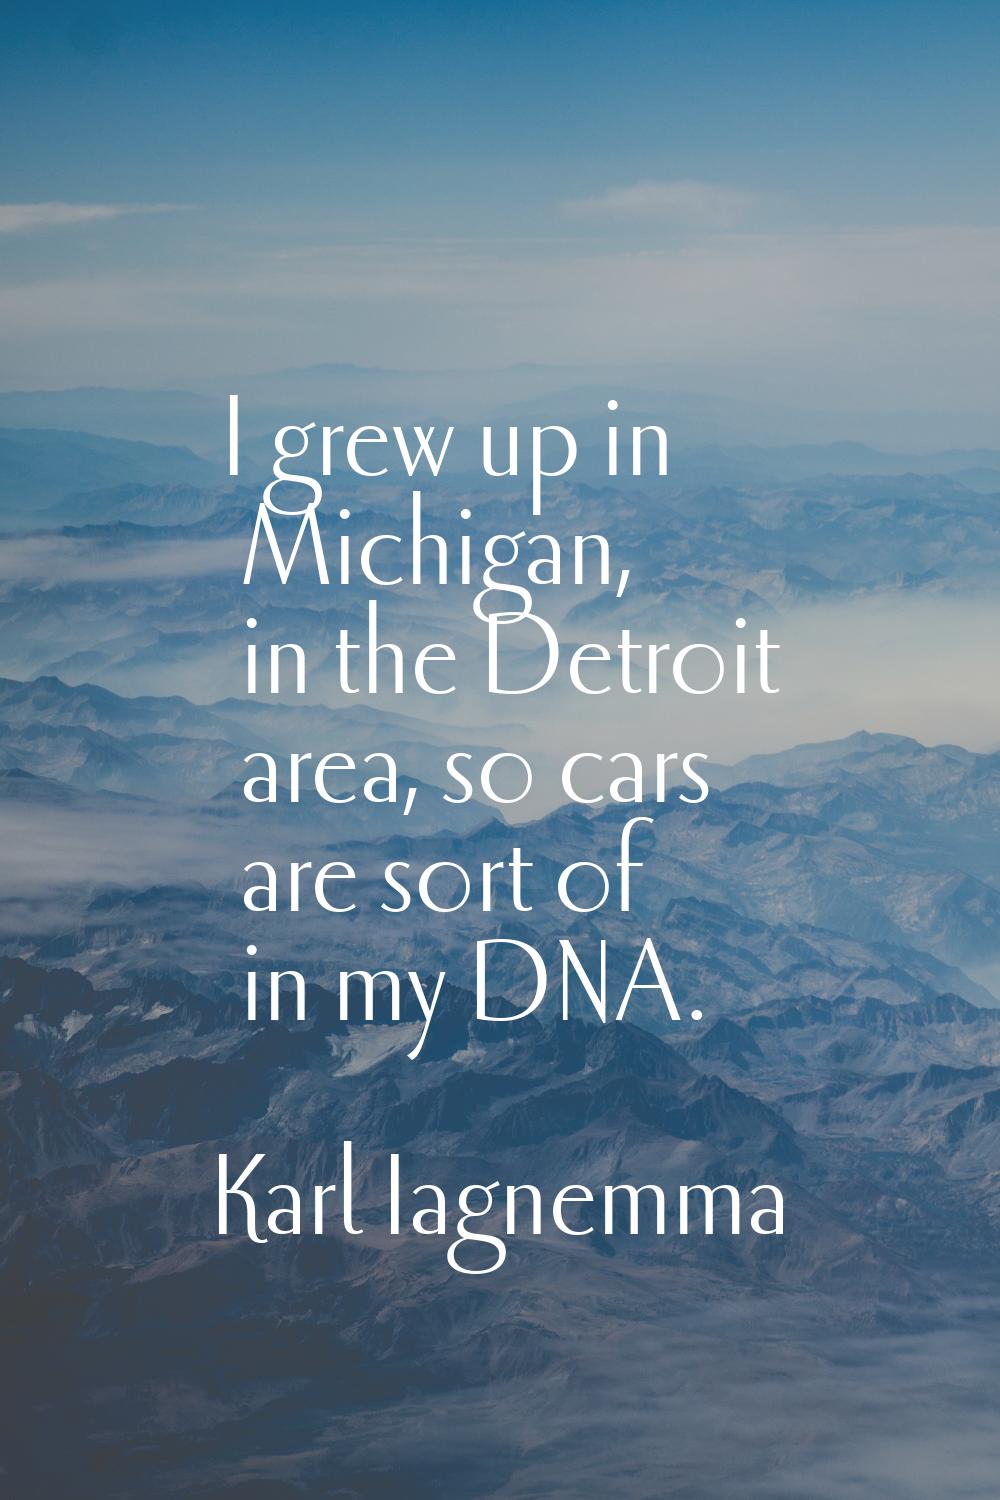 I grew up in Michigan, in the Detroit area, so cars are sort of in my DNA.